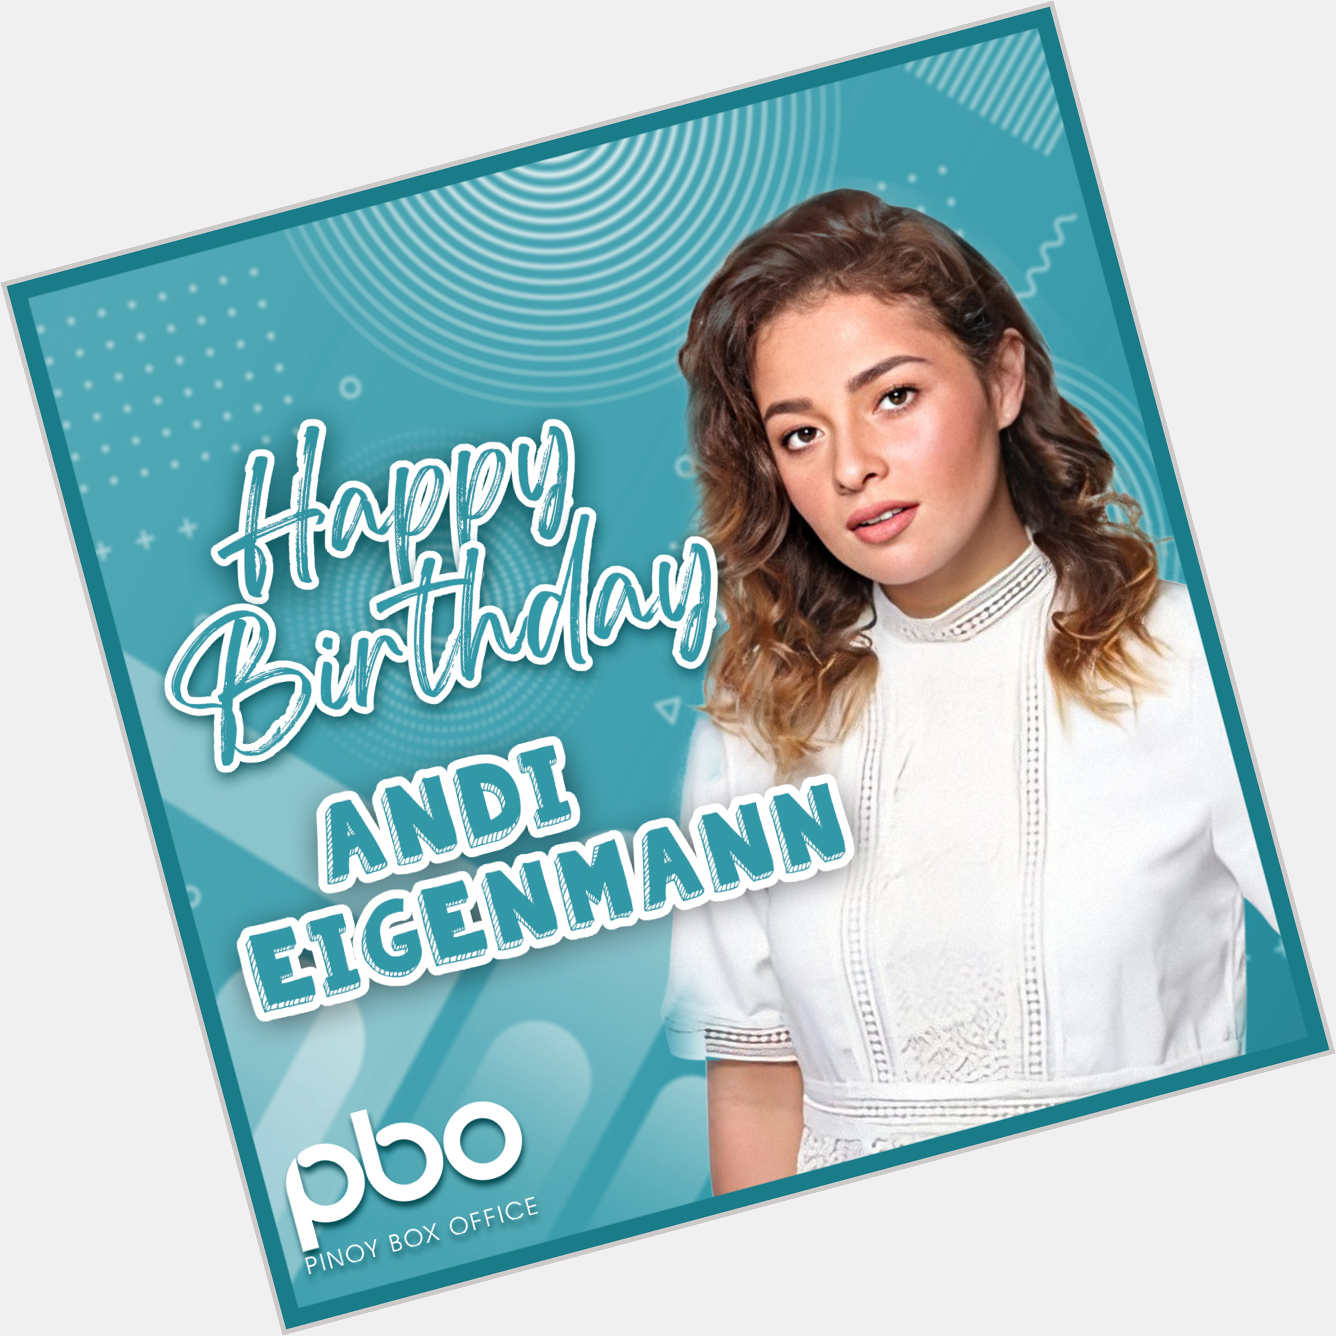 Happy birthday, Andi Eigenmann! May you live your days happily and with no worries! 